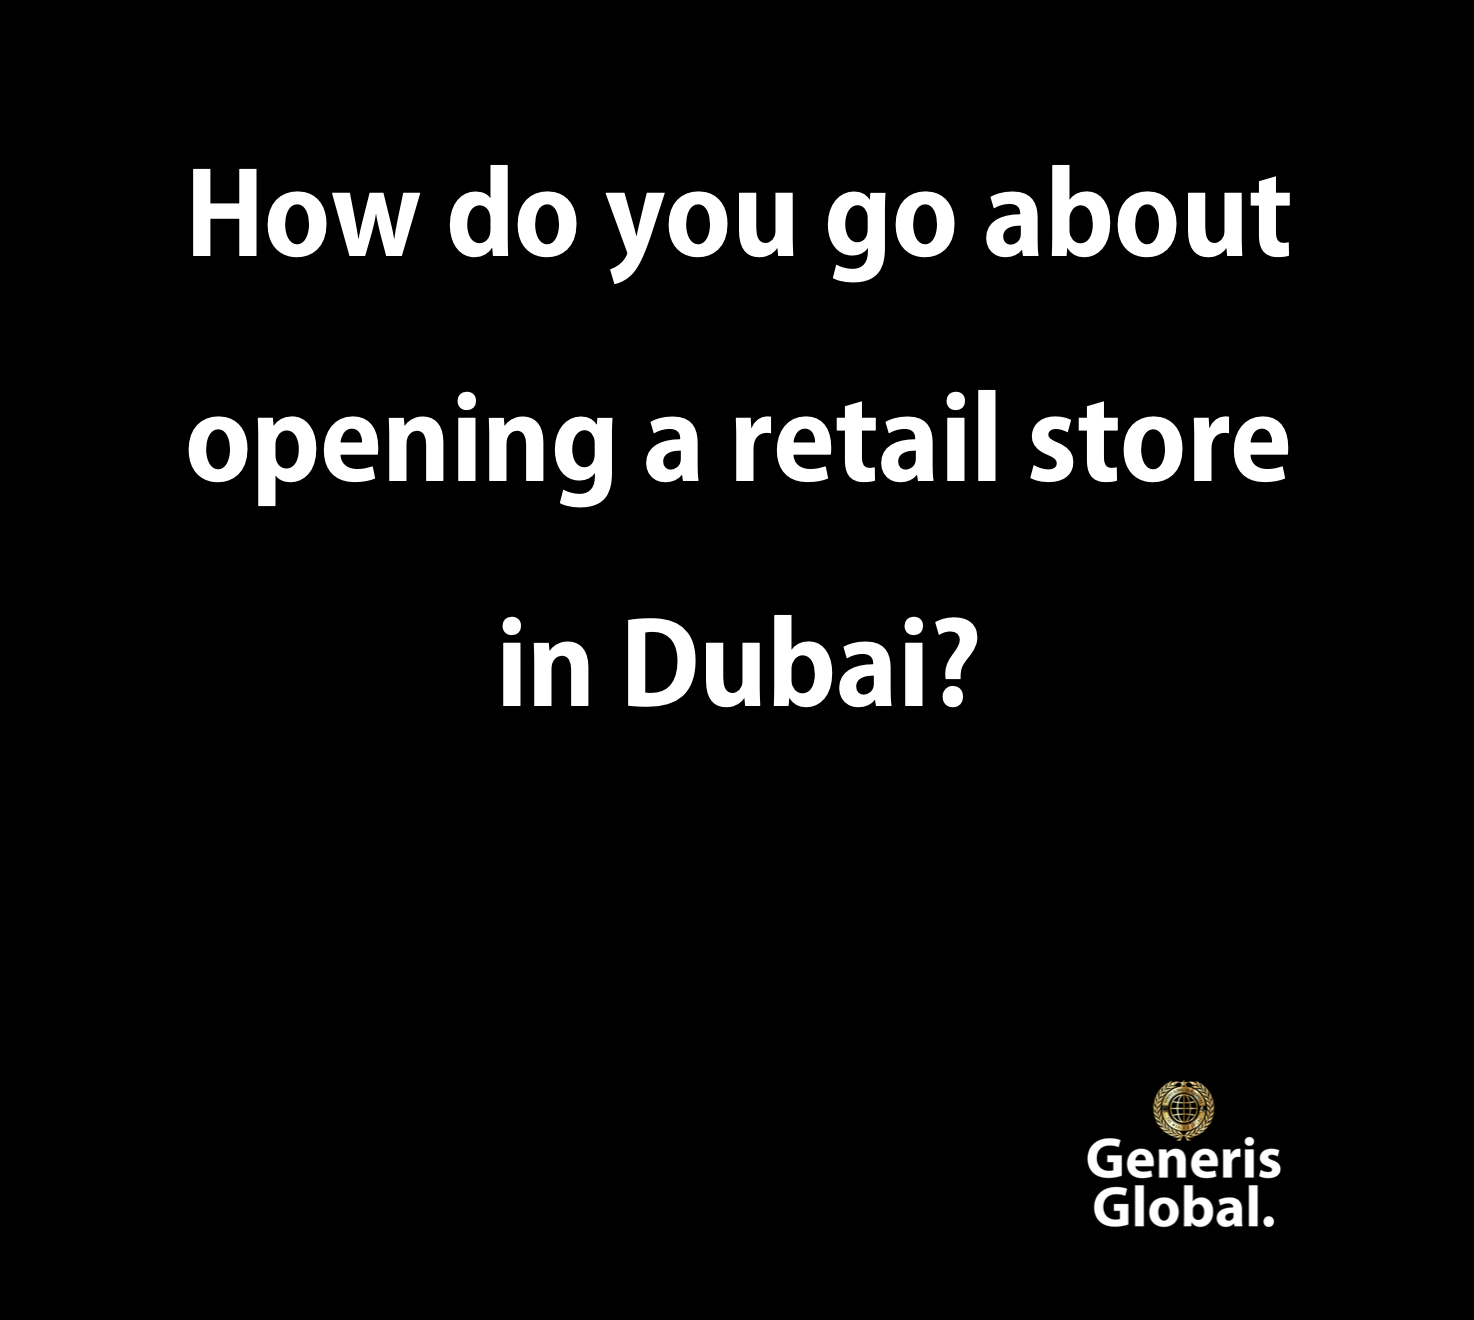 opening a retail store in Dubai